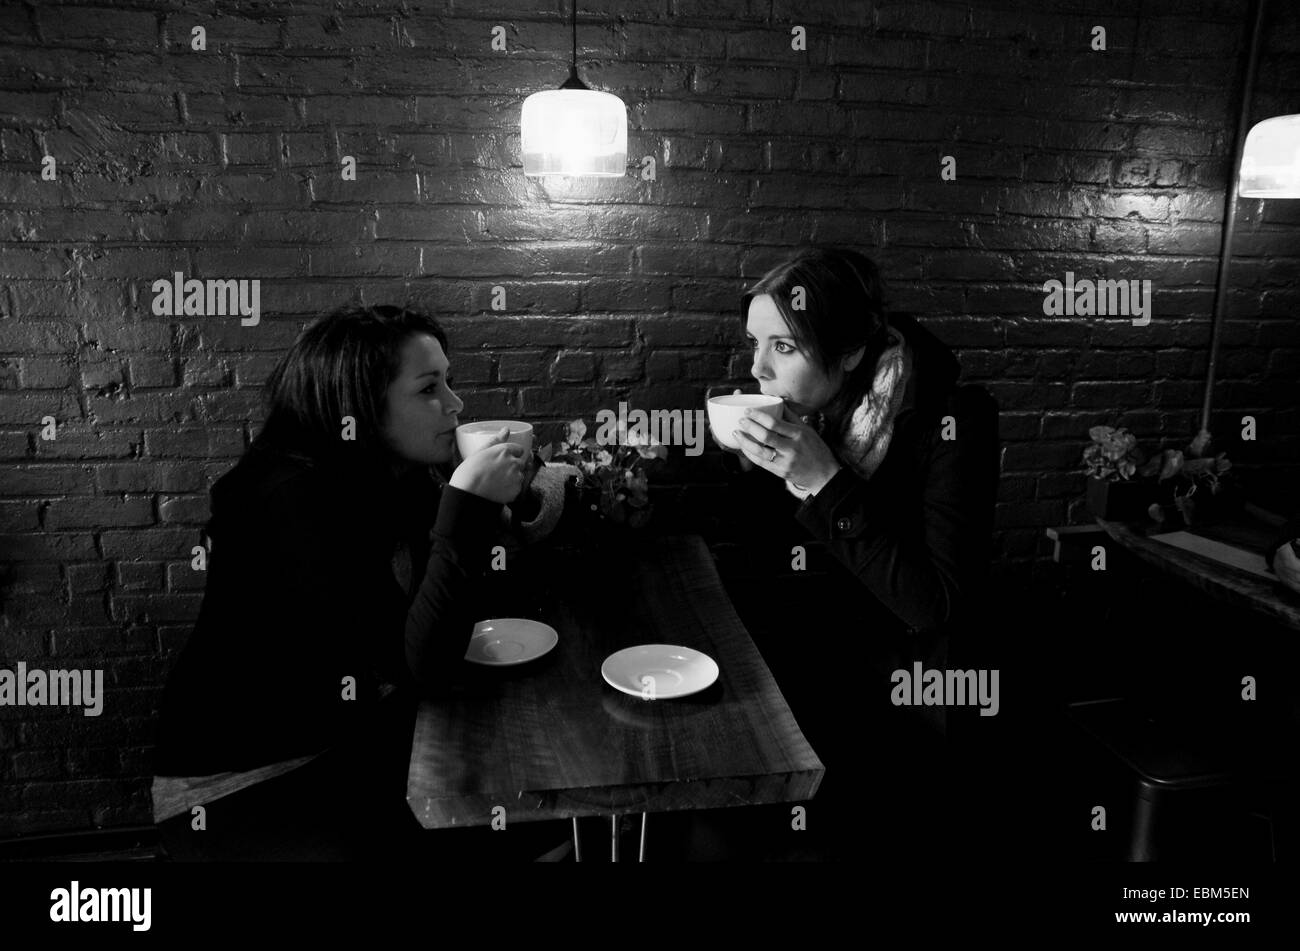 Manhattan New York USA November 2014  - Two young women drink coffee in a Chelsea cafe  Photograph taken by Simon Dack Stock Photo